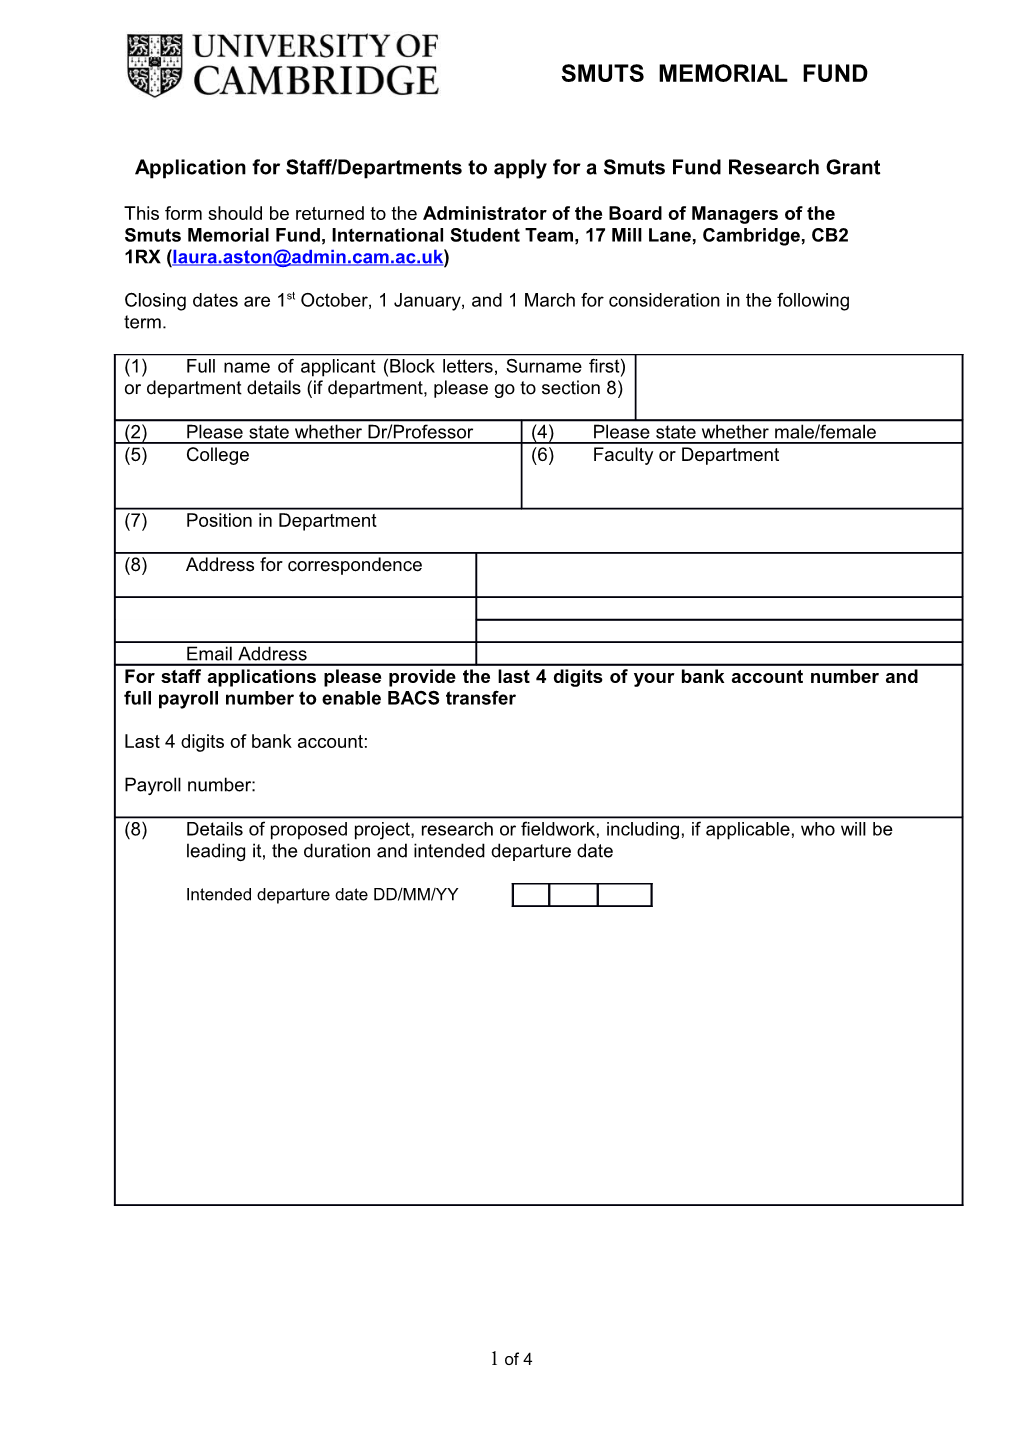 Application for Grant from SMF